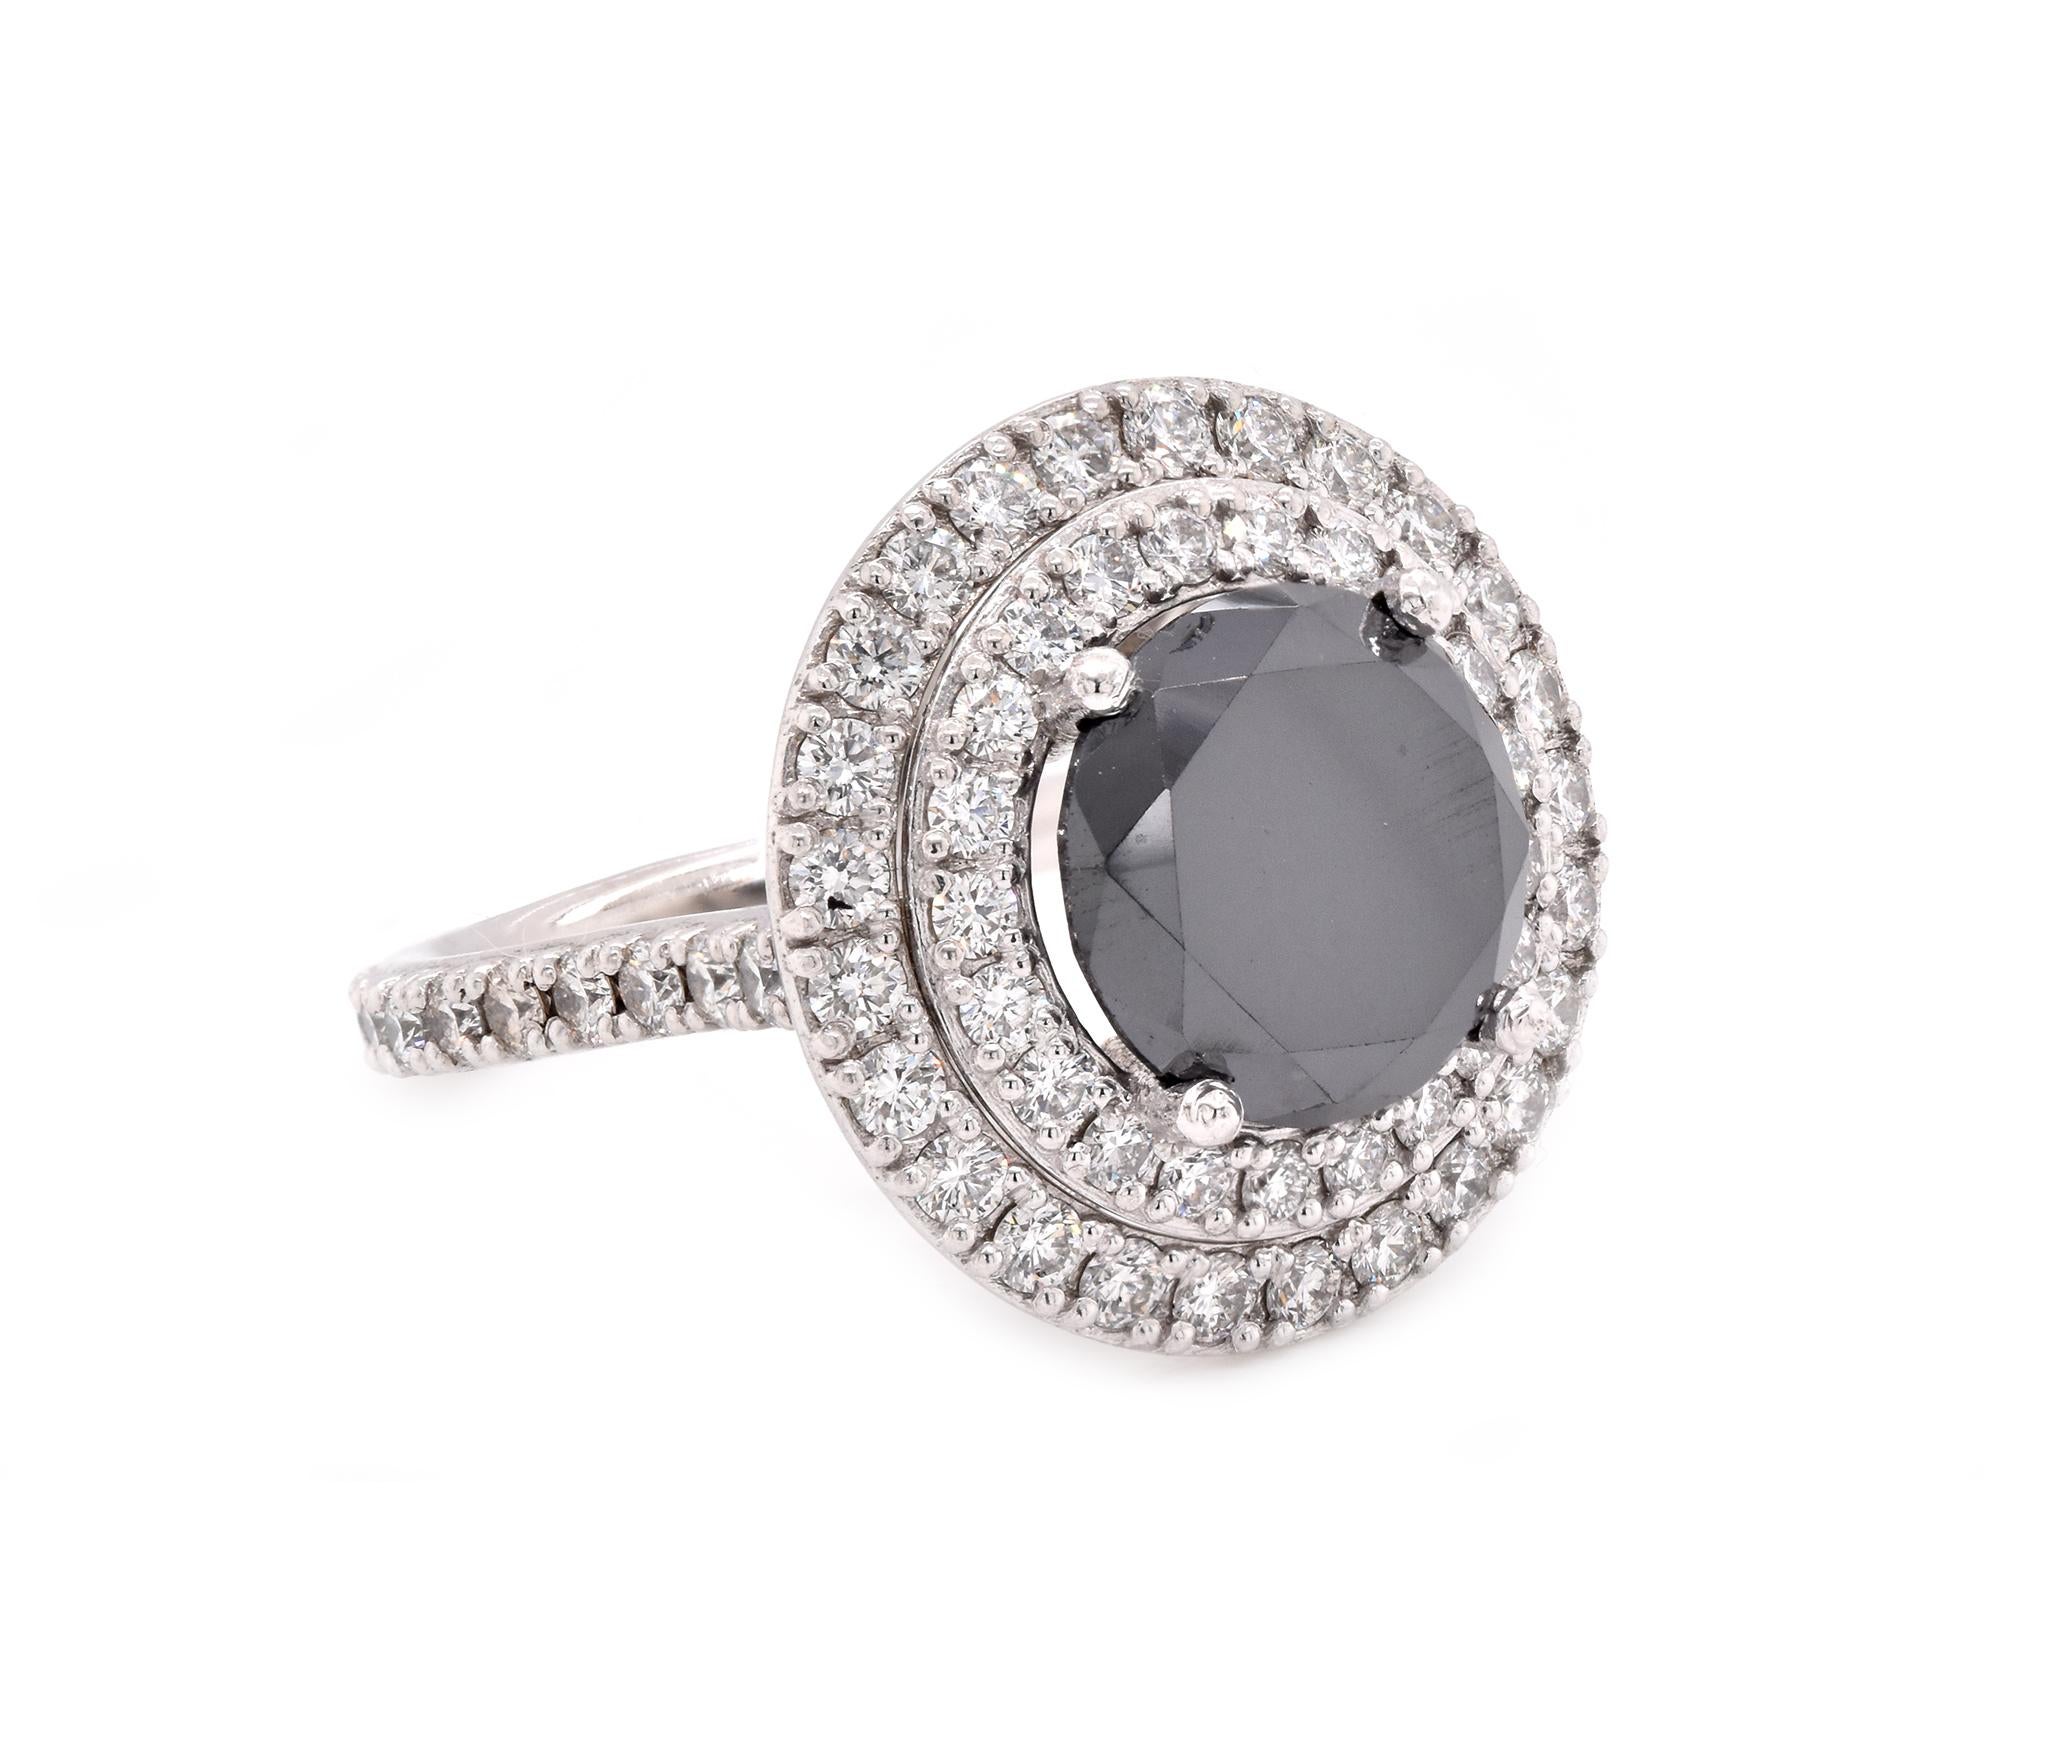 Material: Platinum 
Center Diamond: 1 round brilliant cut = 4.67ct
Color: Black
Diamonds: 65 round cut = 1.32cttw
Color: G
Clarity: SI1
Ring Size: 7 (please allow up to 2 additional business days for sizing requests)
Dimensions: ring shank measures